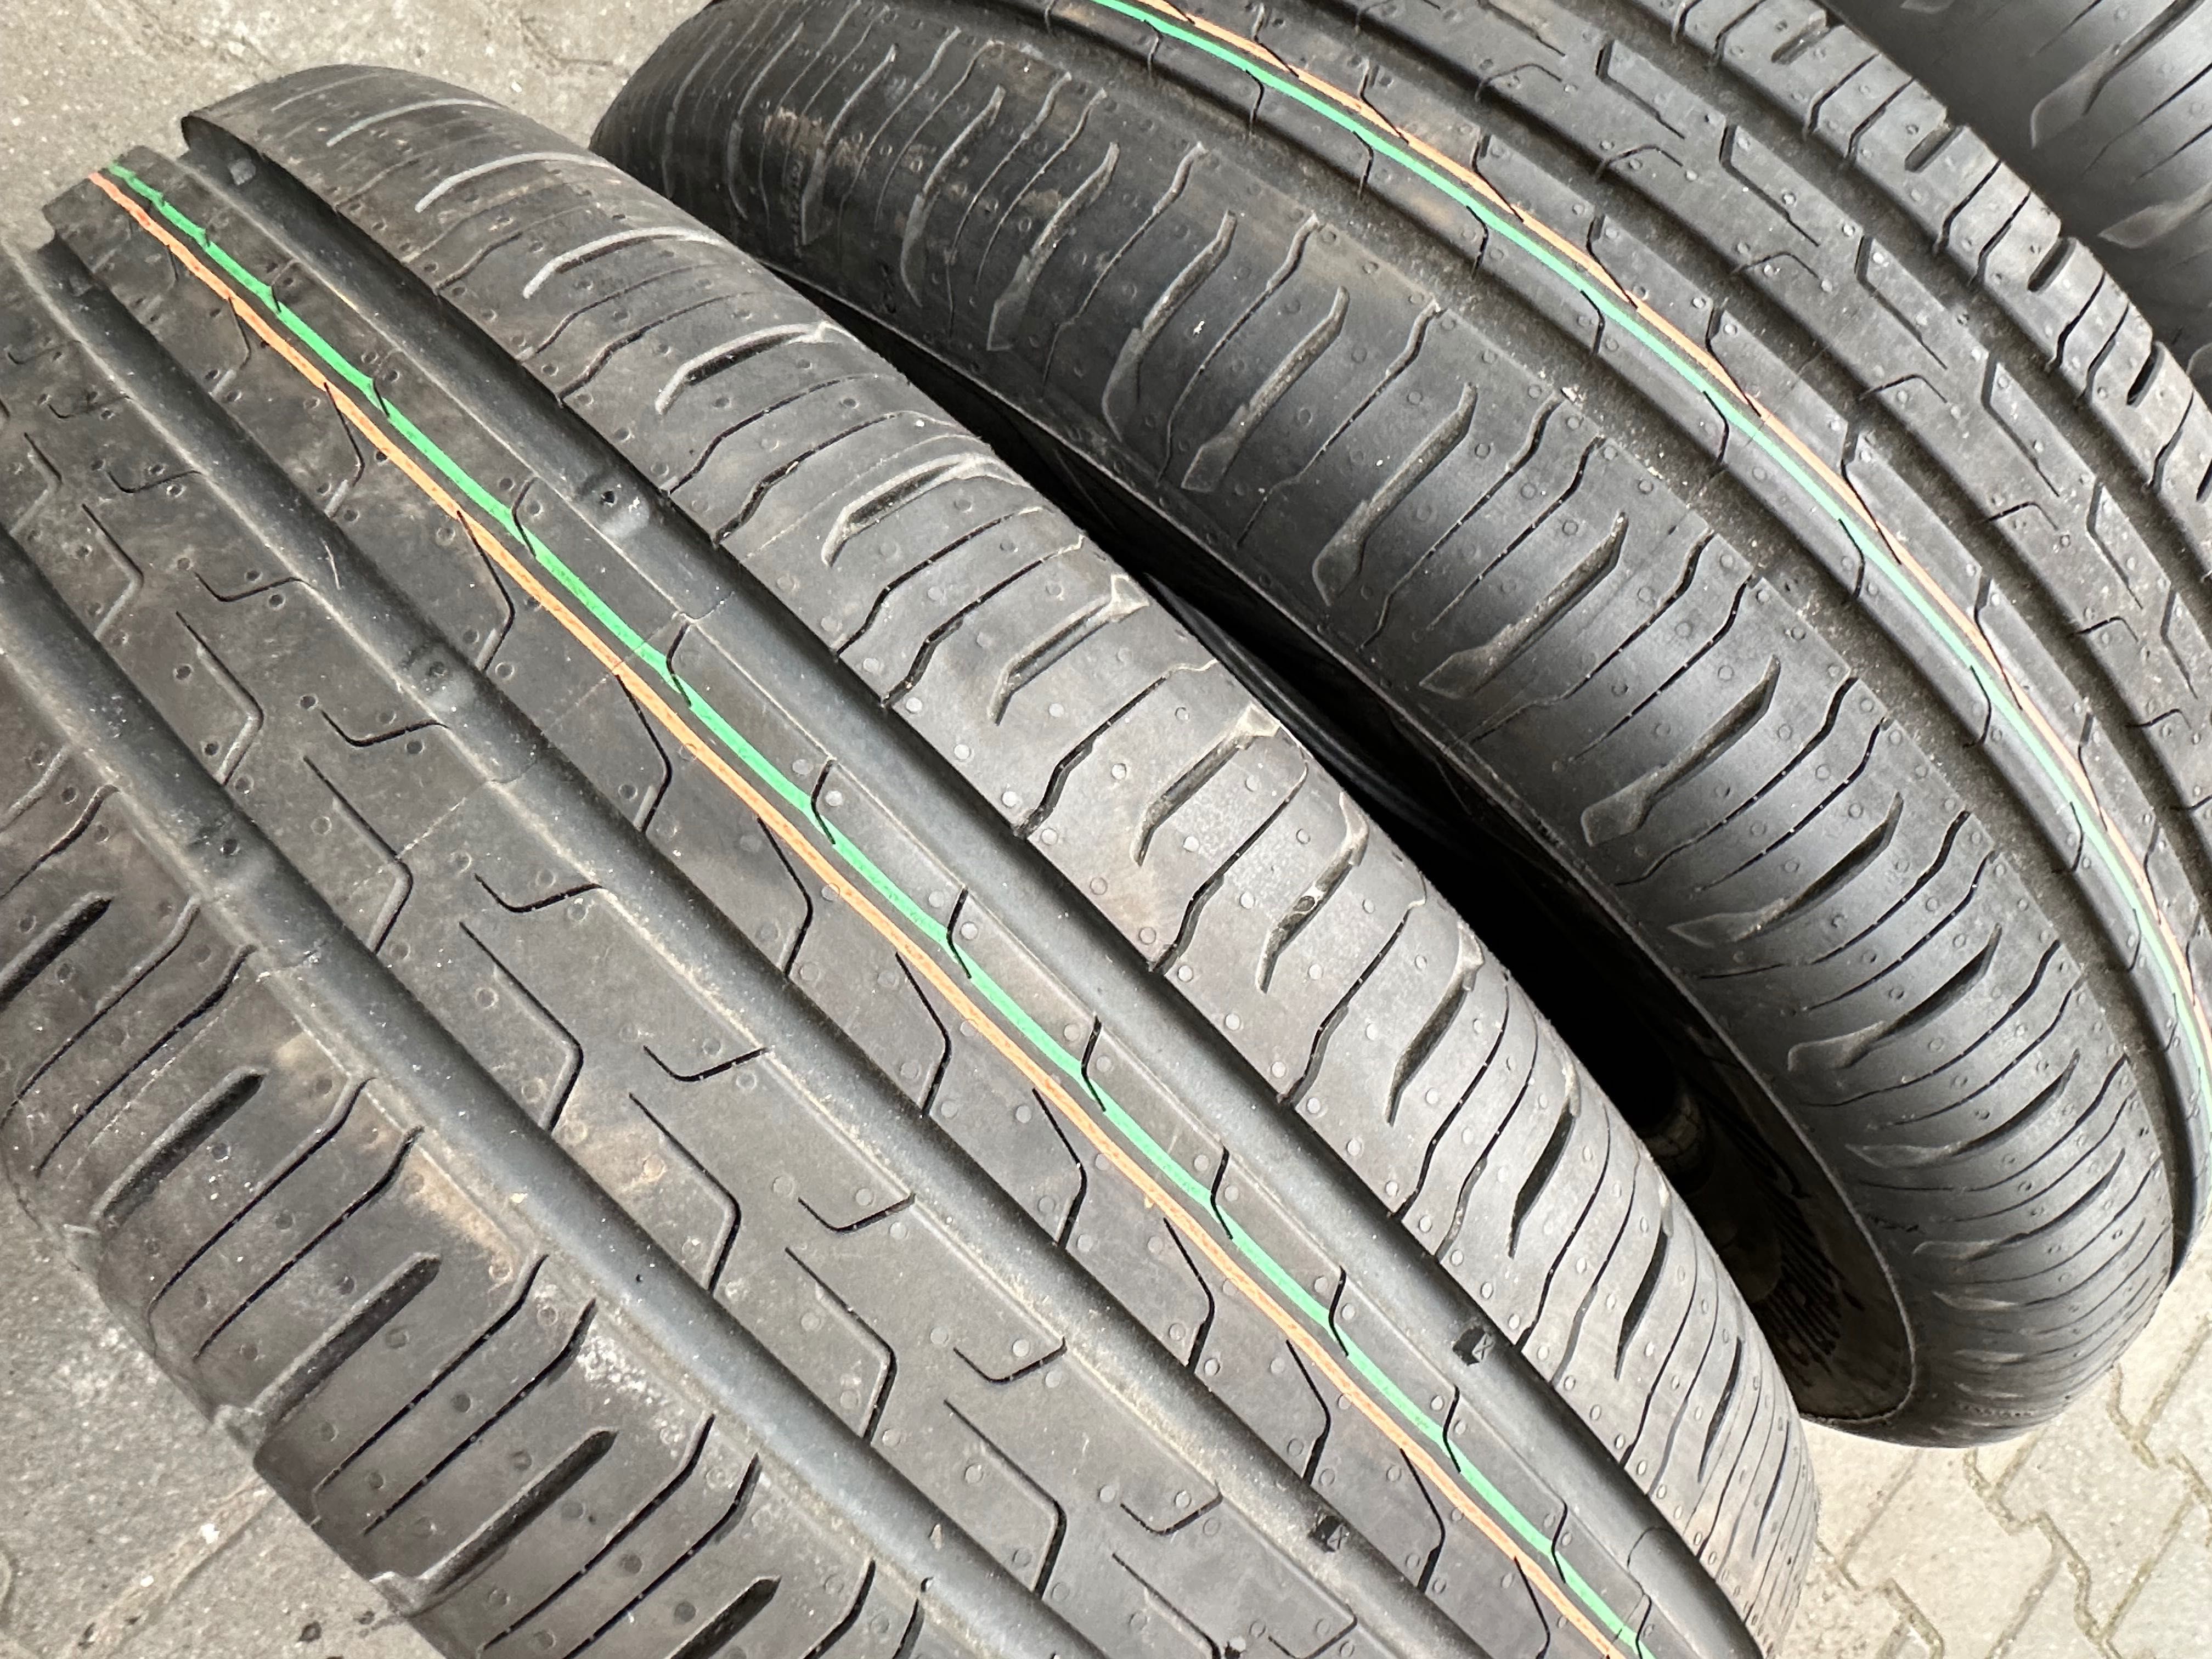 4x Nowe Opony 195/65R15 91H XL Continental EcoContact 6